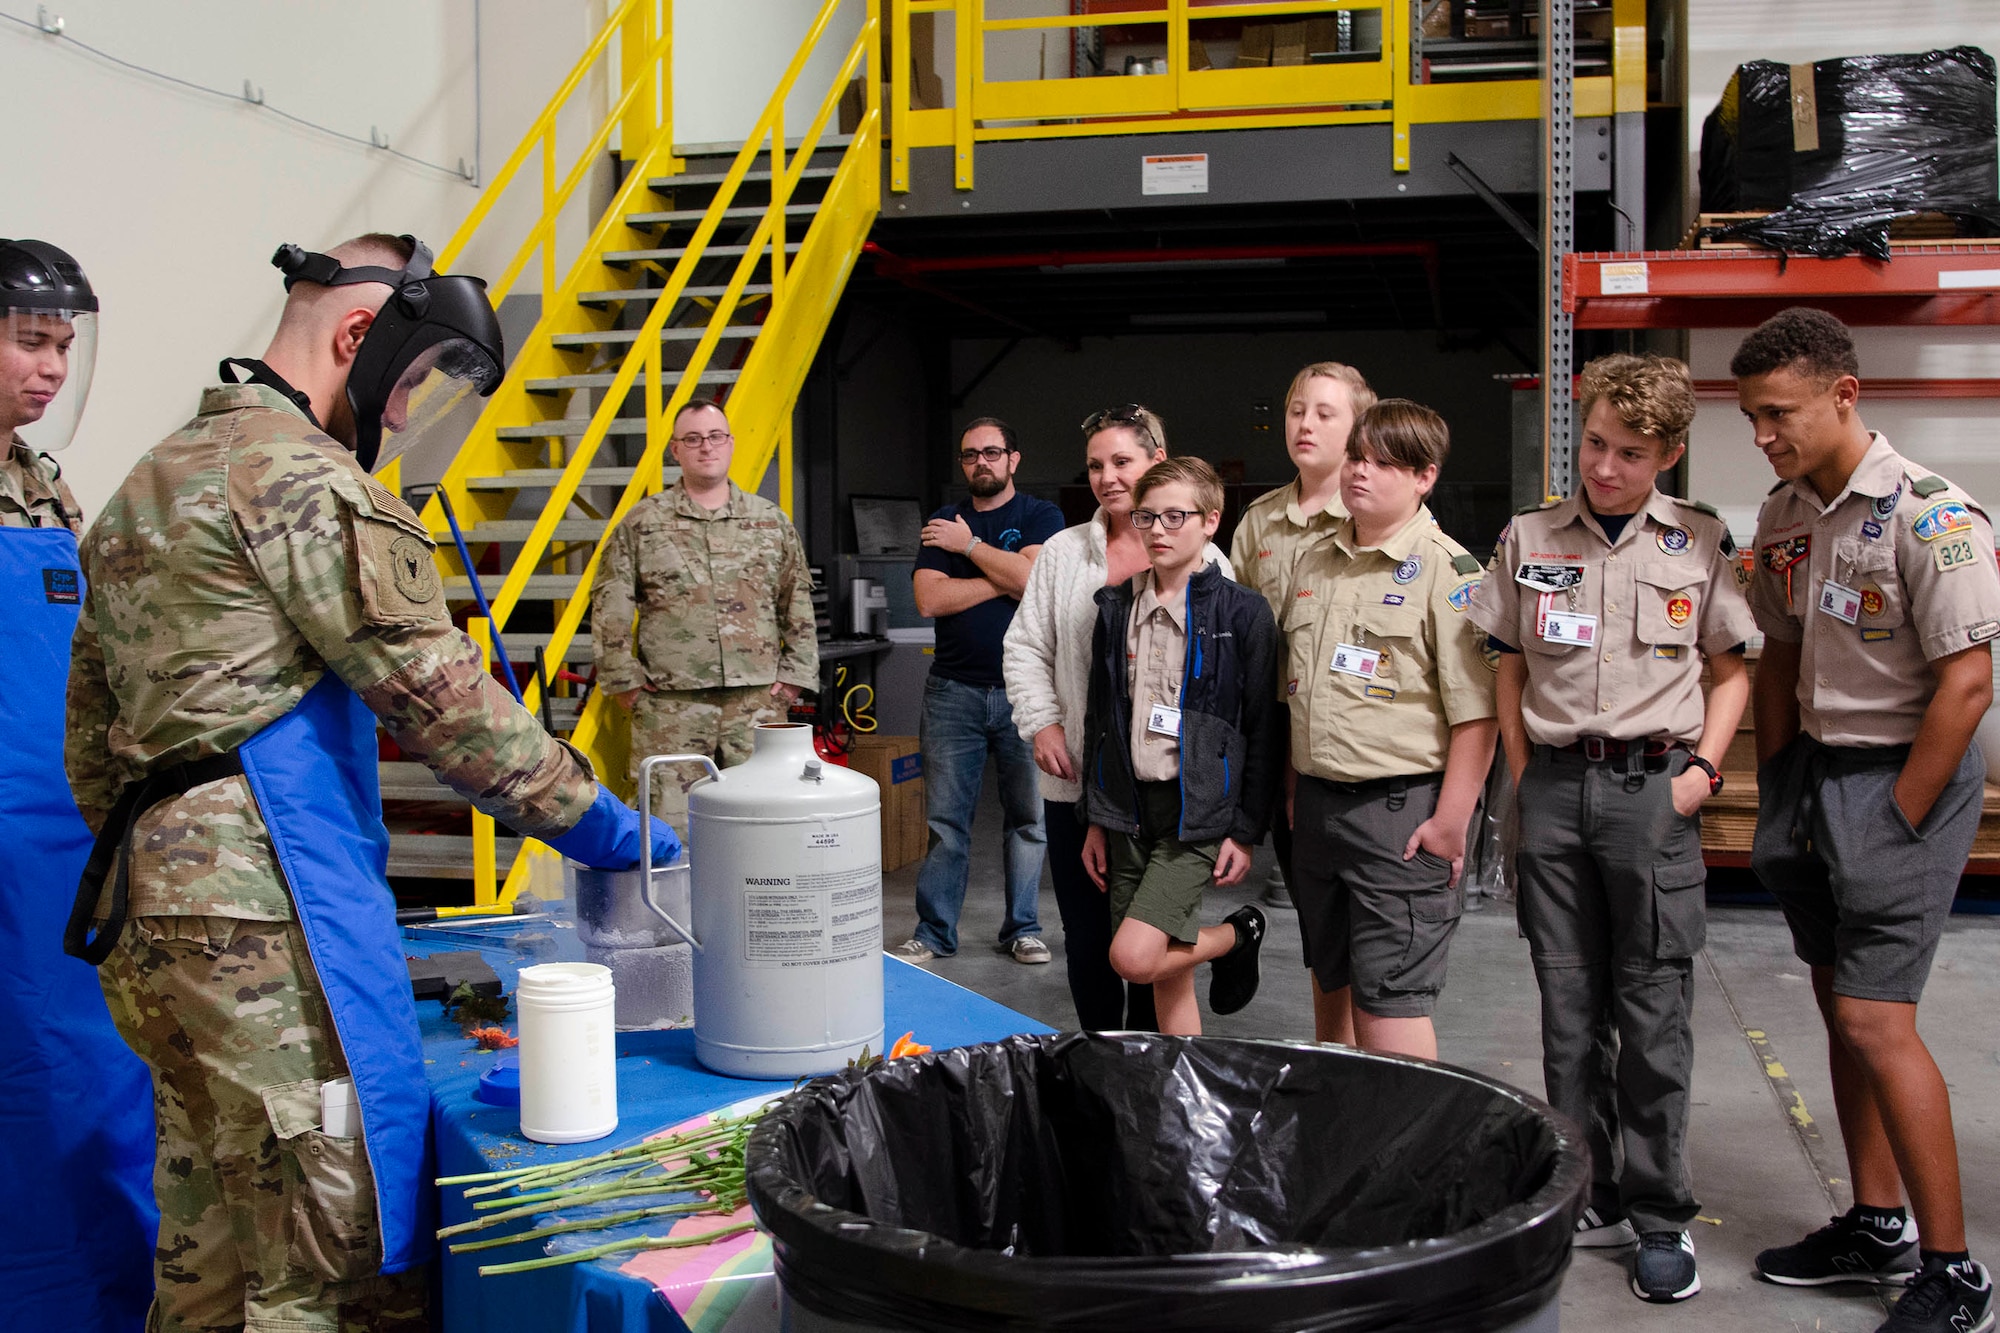 Airman Zachary Maga, a scientific applications specialist at the U.S. Air Force Radiochemistry Lab, demonstrate what happens when a carnation is placed into a container of liquid nitrogen, as Boy Scouts from around Central Florida observe the experiment.  Maga and his co-worker, Staff Sgt. Albert Silvain Jr., (far left) volunteered their time to help the scouts earn the Nuclear Science Merit Badge at Patrick Space Force Base, Fla., Oct. 22, 2022.  (U.S. Air Force photo by Susan A. Romano)